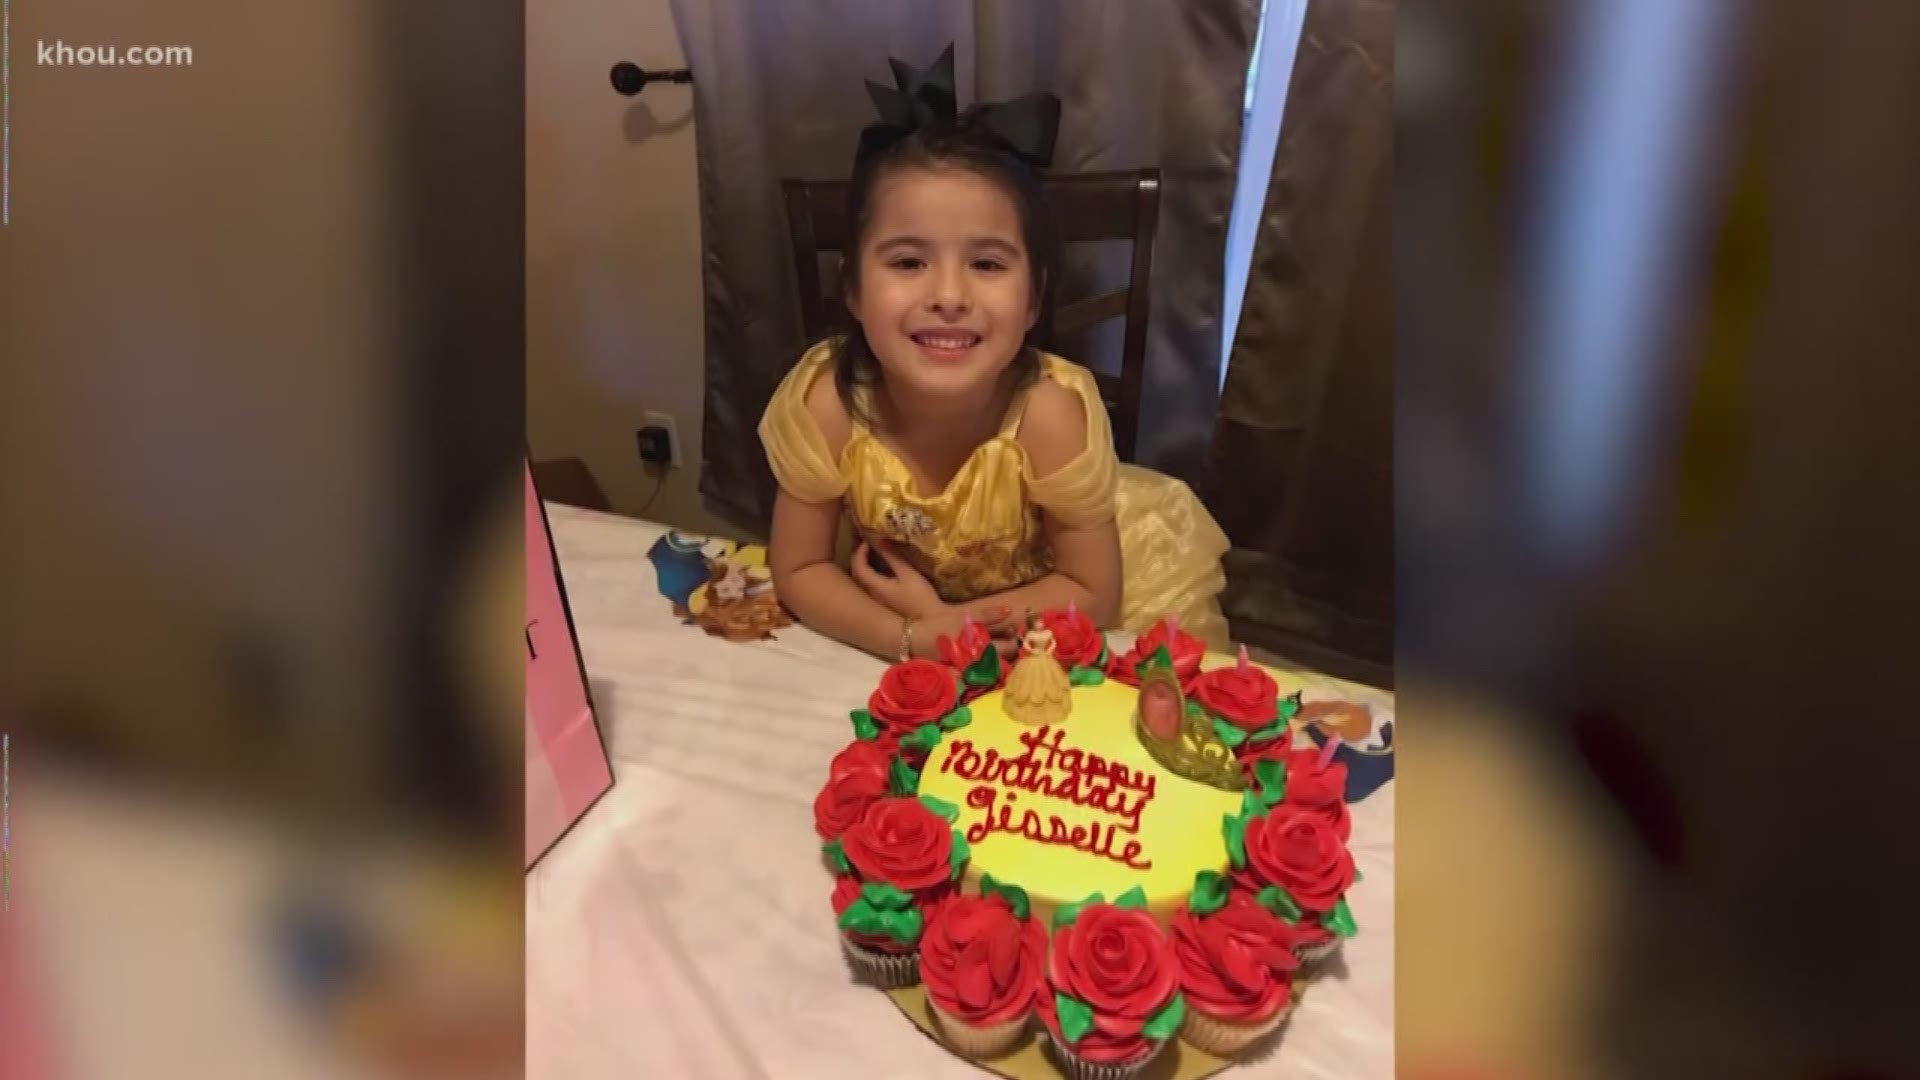 Family members of the 5-year-old girl left badly injured in a suspected DWI crash confirmed her death Sunday. Now, they're planning to donate her organs.